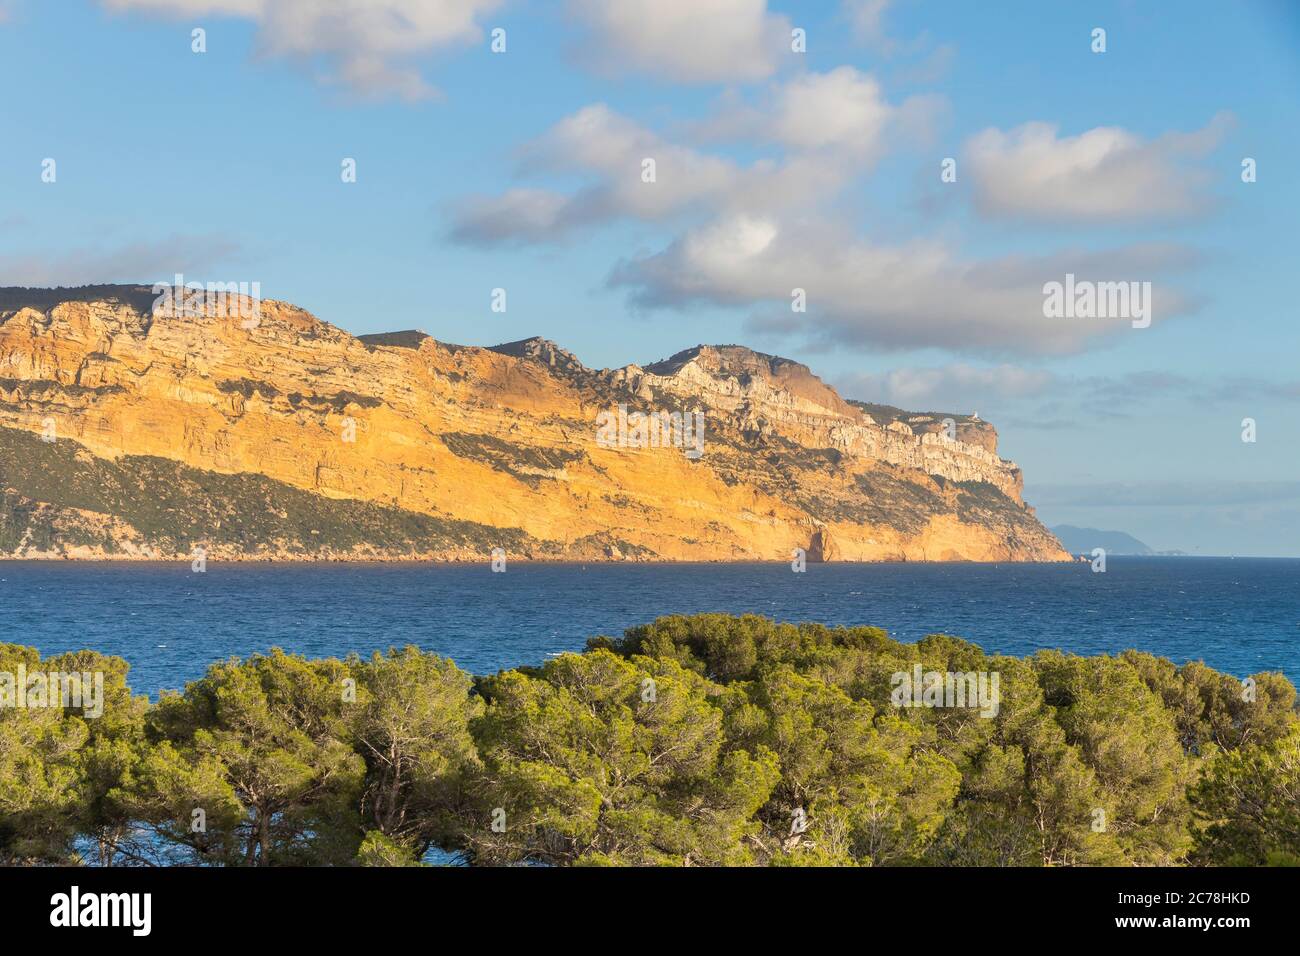 View from the Calanques National Park to Cape Canaille, Cassis, Provence, France, Europe Stock Photo